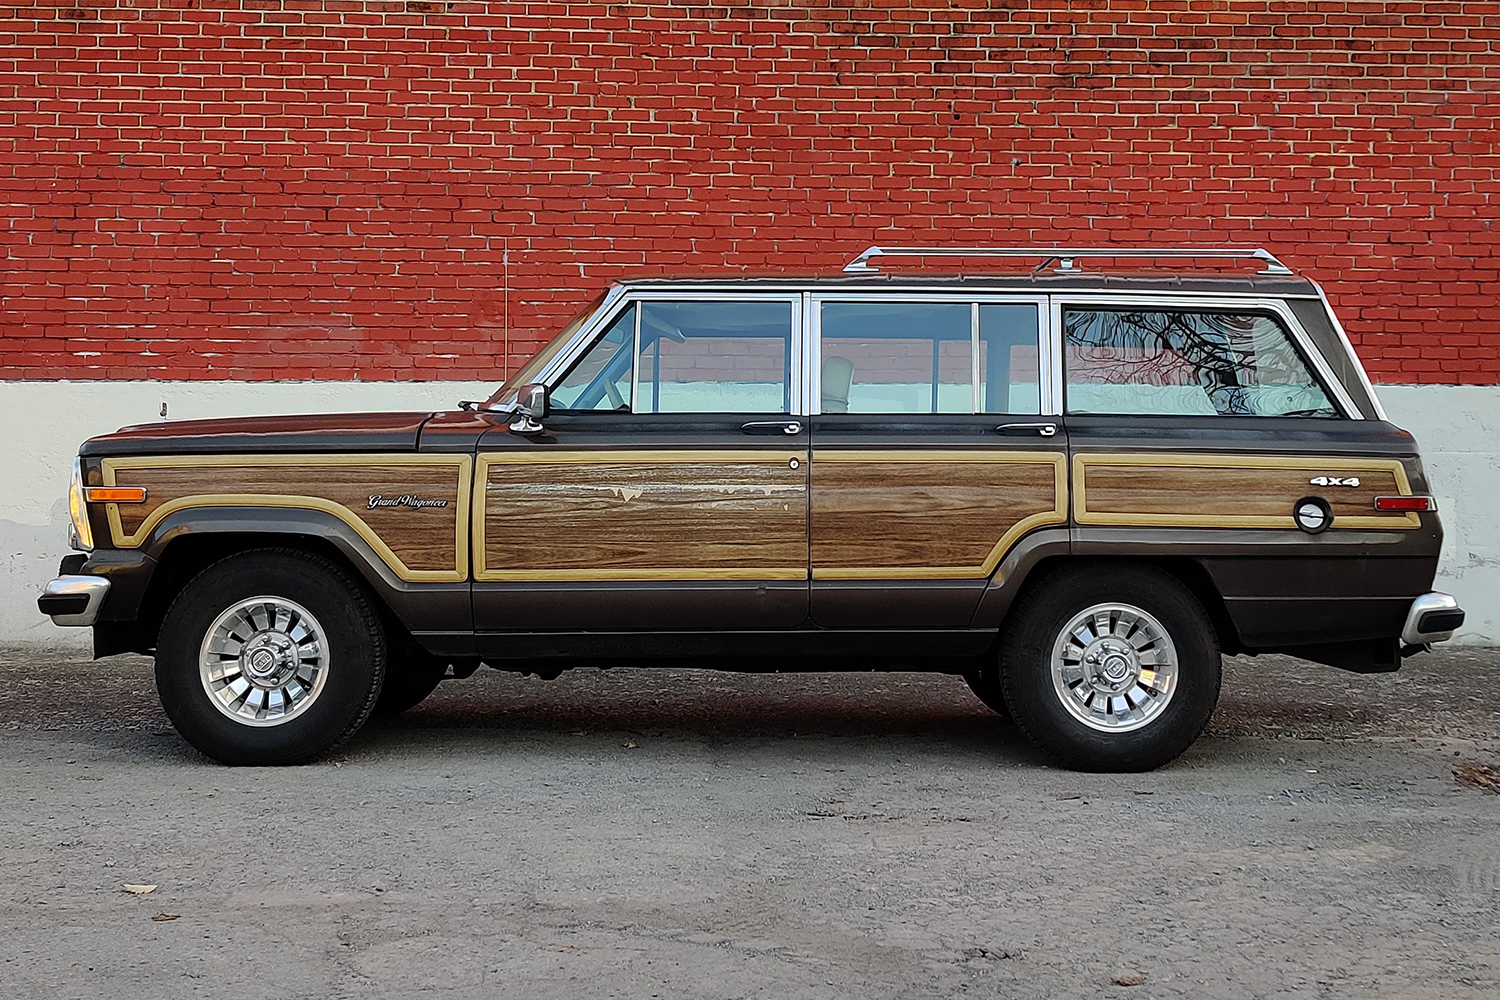 The side profile of a 1987 Jeep Grand Wagoneer against a red brick wall